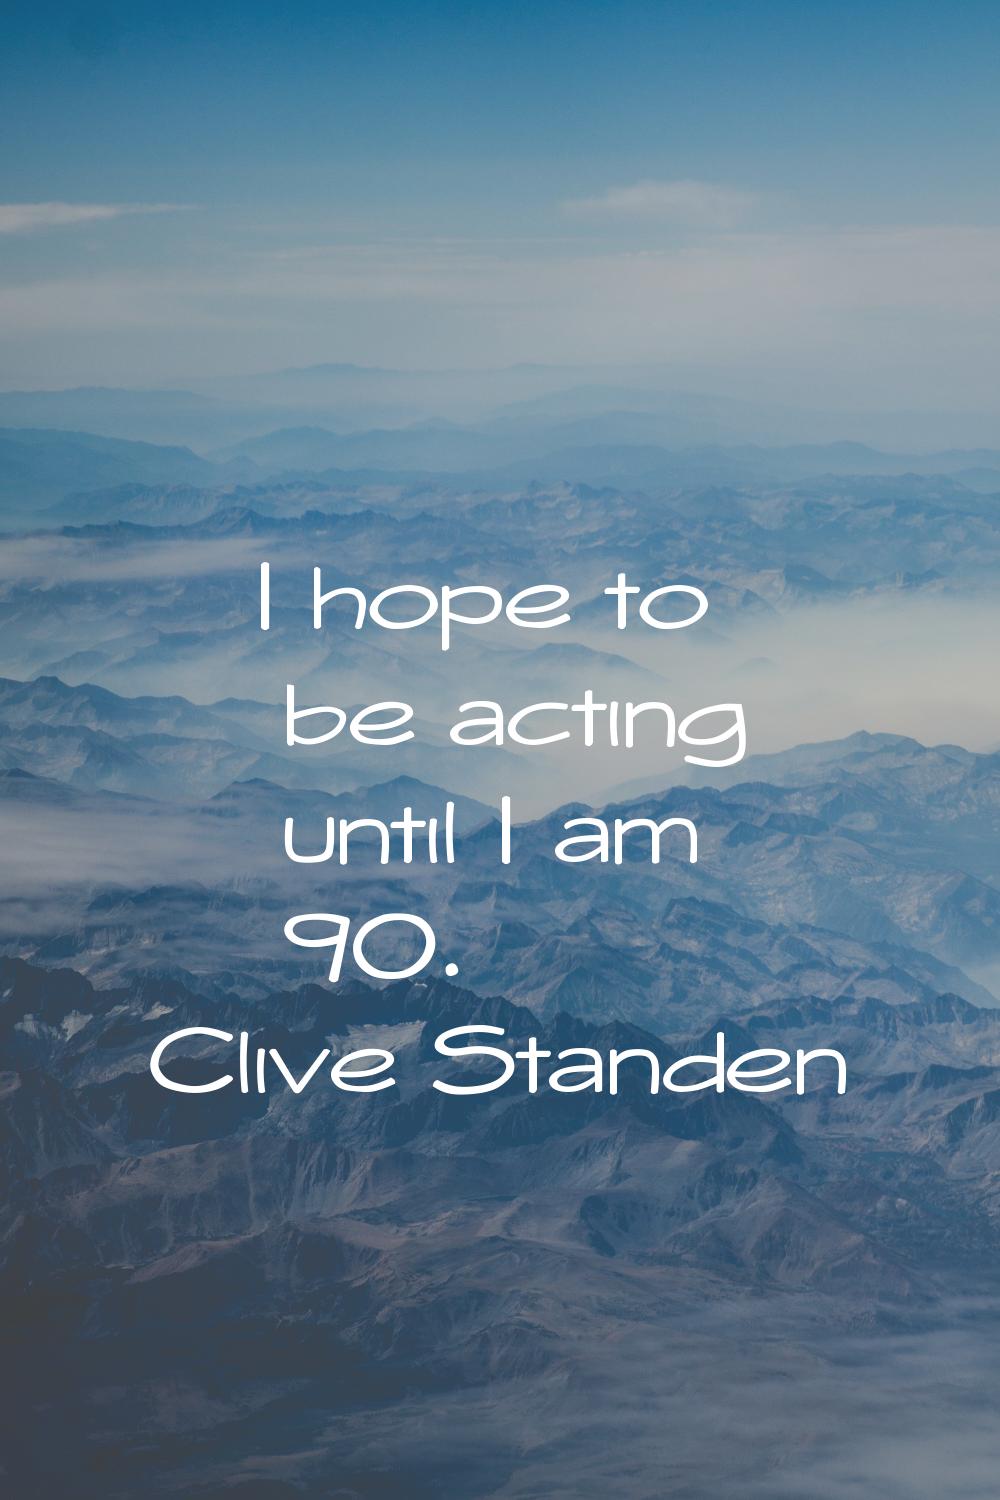 I hope to be acting until I am 90.